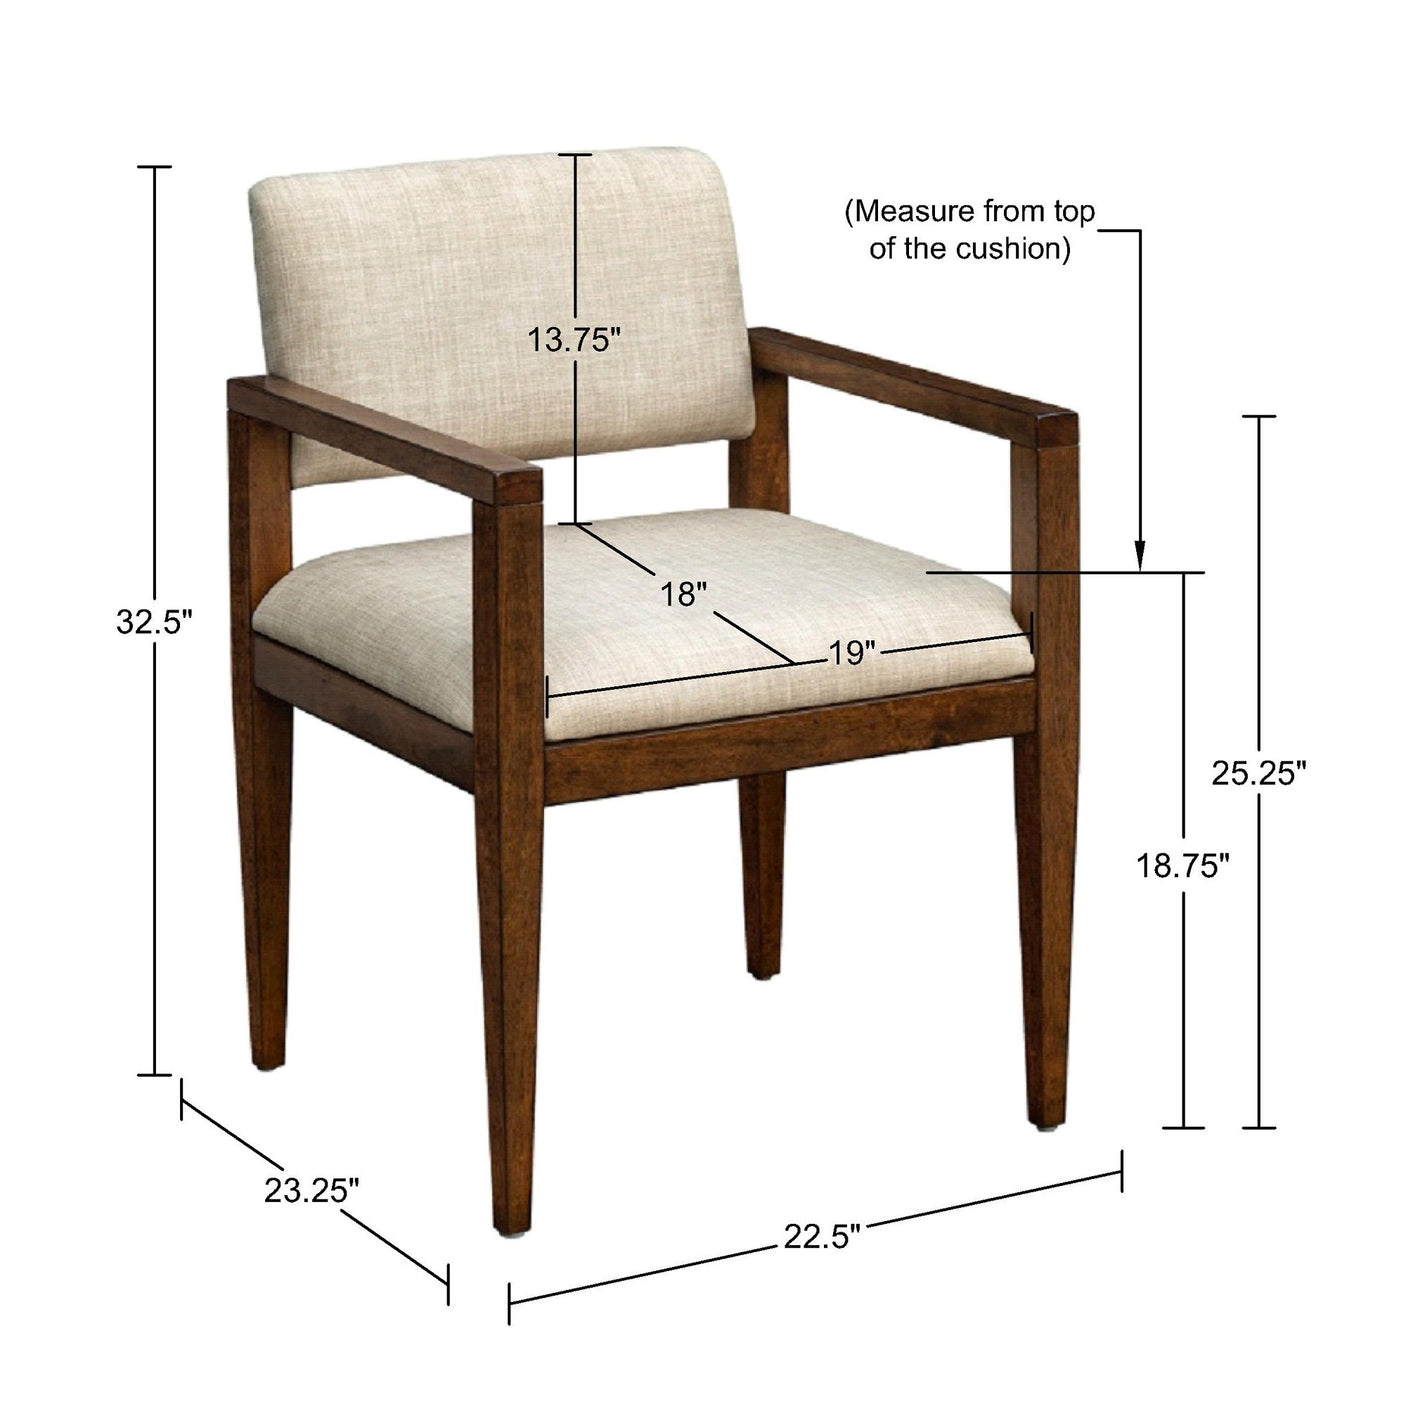 Benson Upholstered Dining Chairs with Arms (Set of 2)